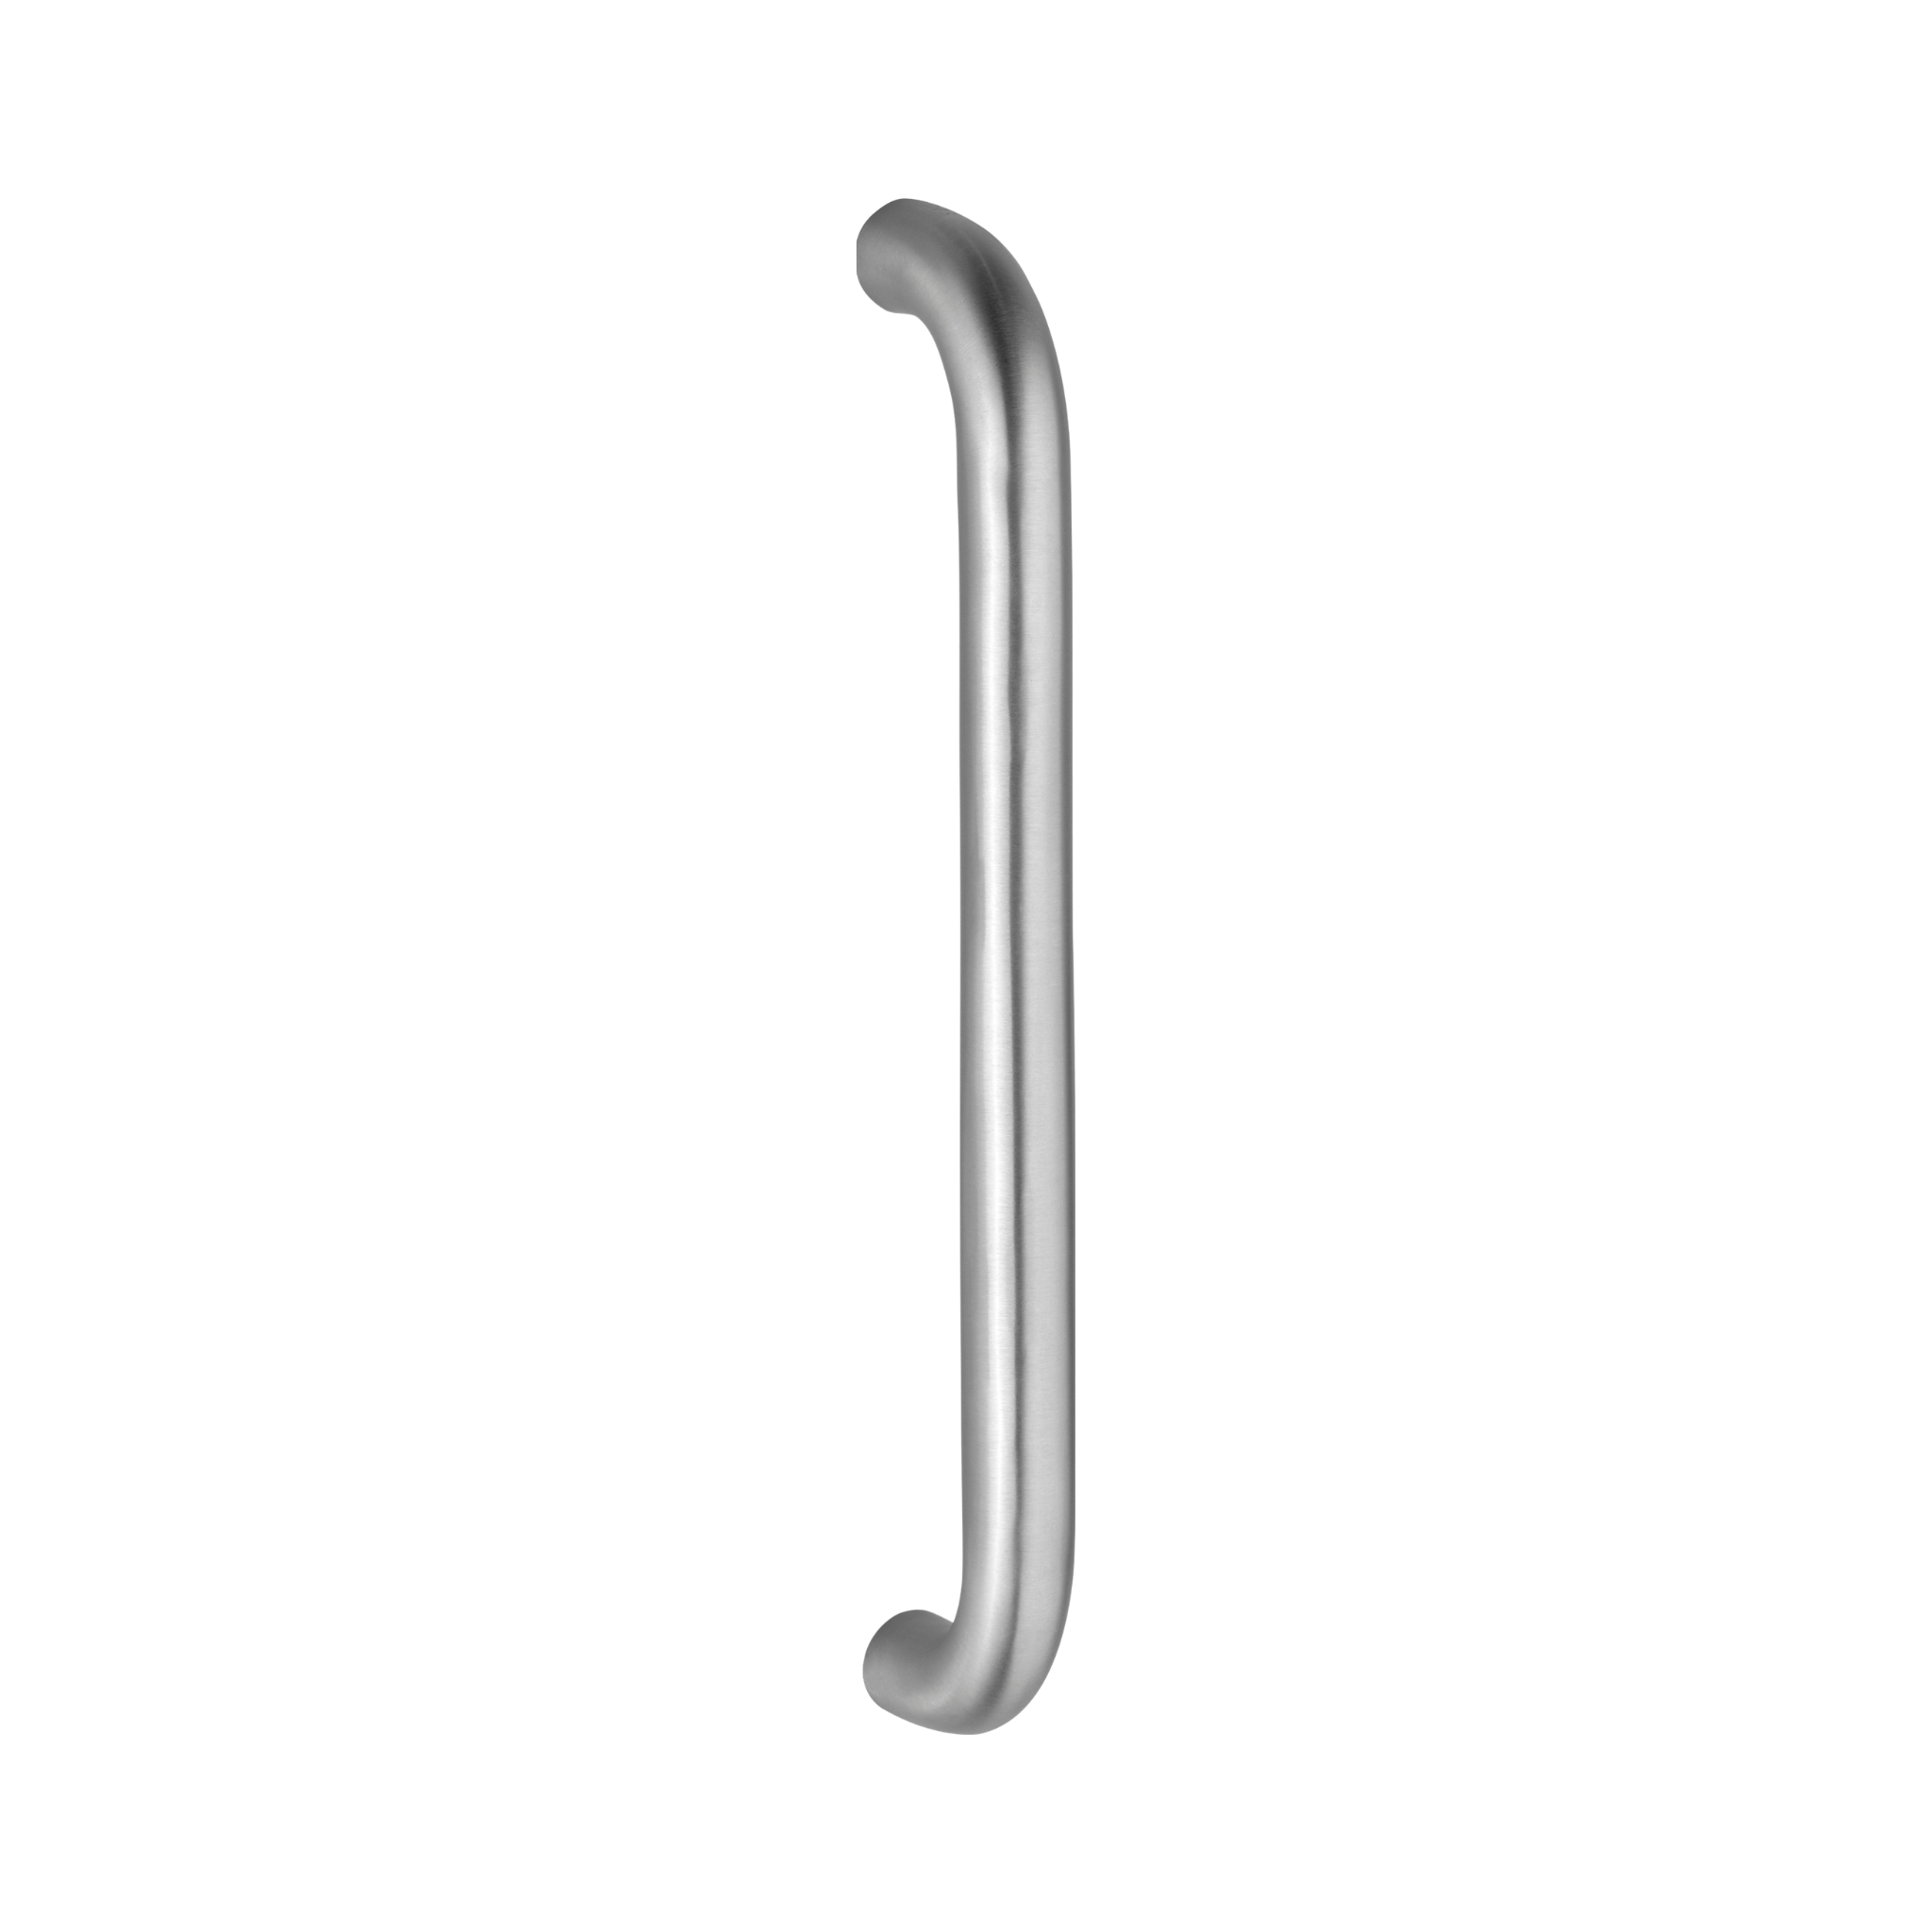 FP.D07.BB.TR, Pull Handle, Tubular, D Handle, BTB, 19mm (Ø) x 200mm (l) x 181mm (ctc), Stainless Steel with Tarnish Resistant, CISA